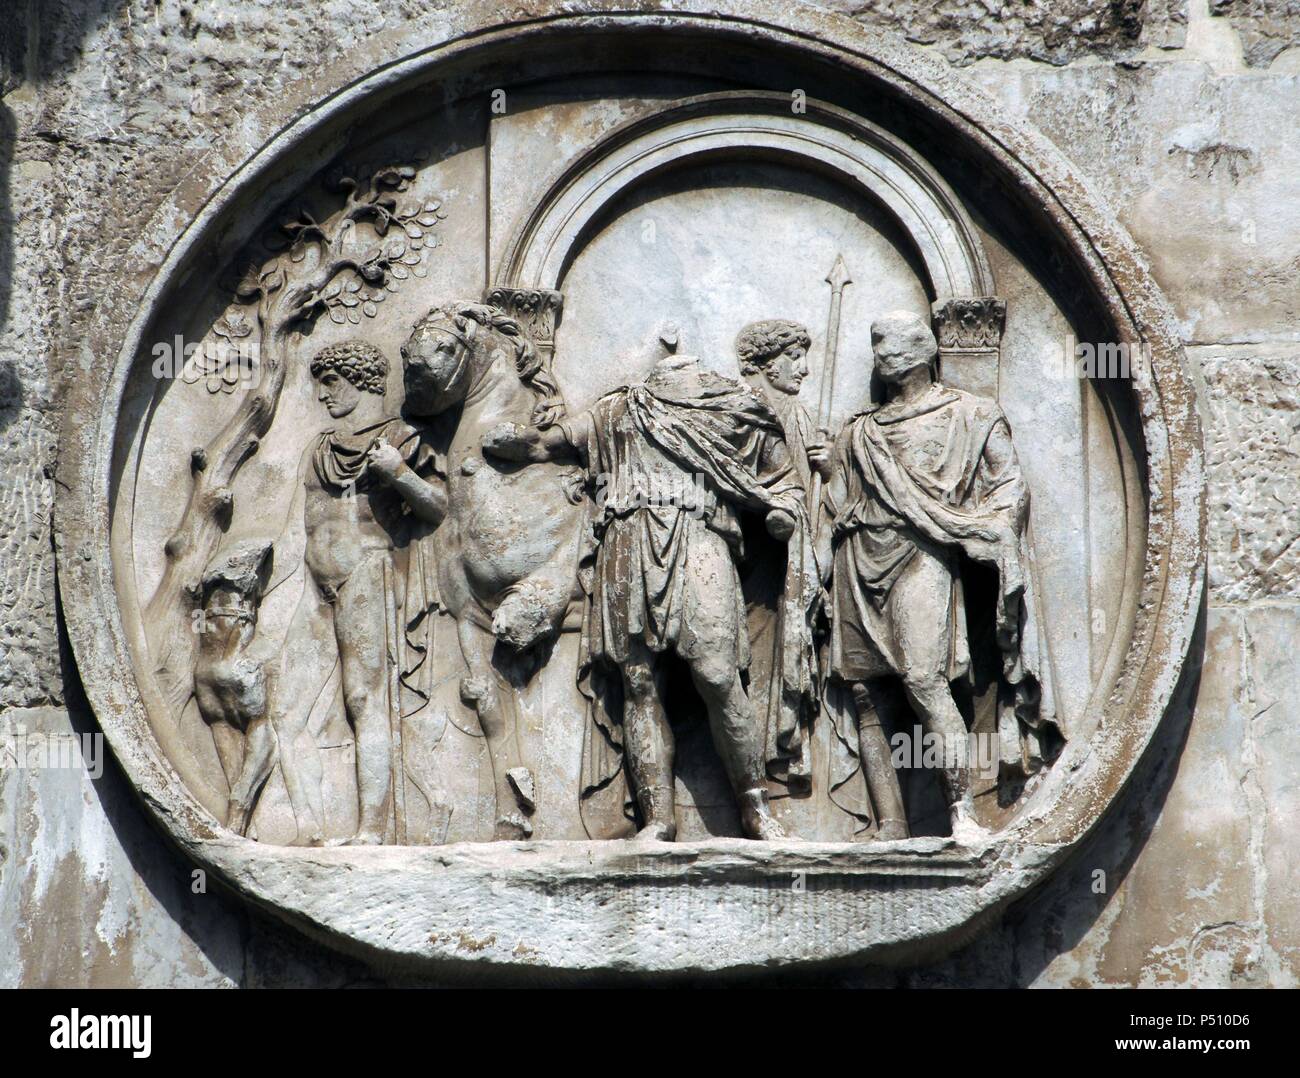 Roman Art. Arch of Constantine. Triumphal arch erected in the 4th century (315) by the Senate in honor of the Emperor Constantine after his victory over Maxentius at the Battle of Milvian Bridge (312). Relief. Rome. Italy. Stock Photo